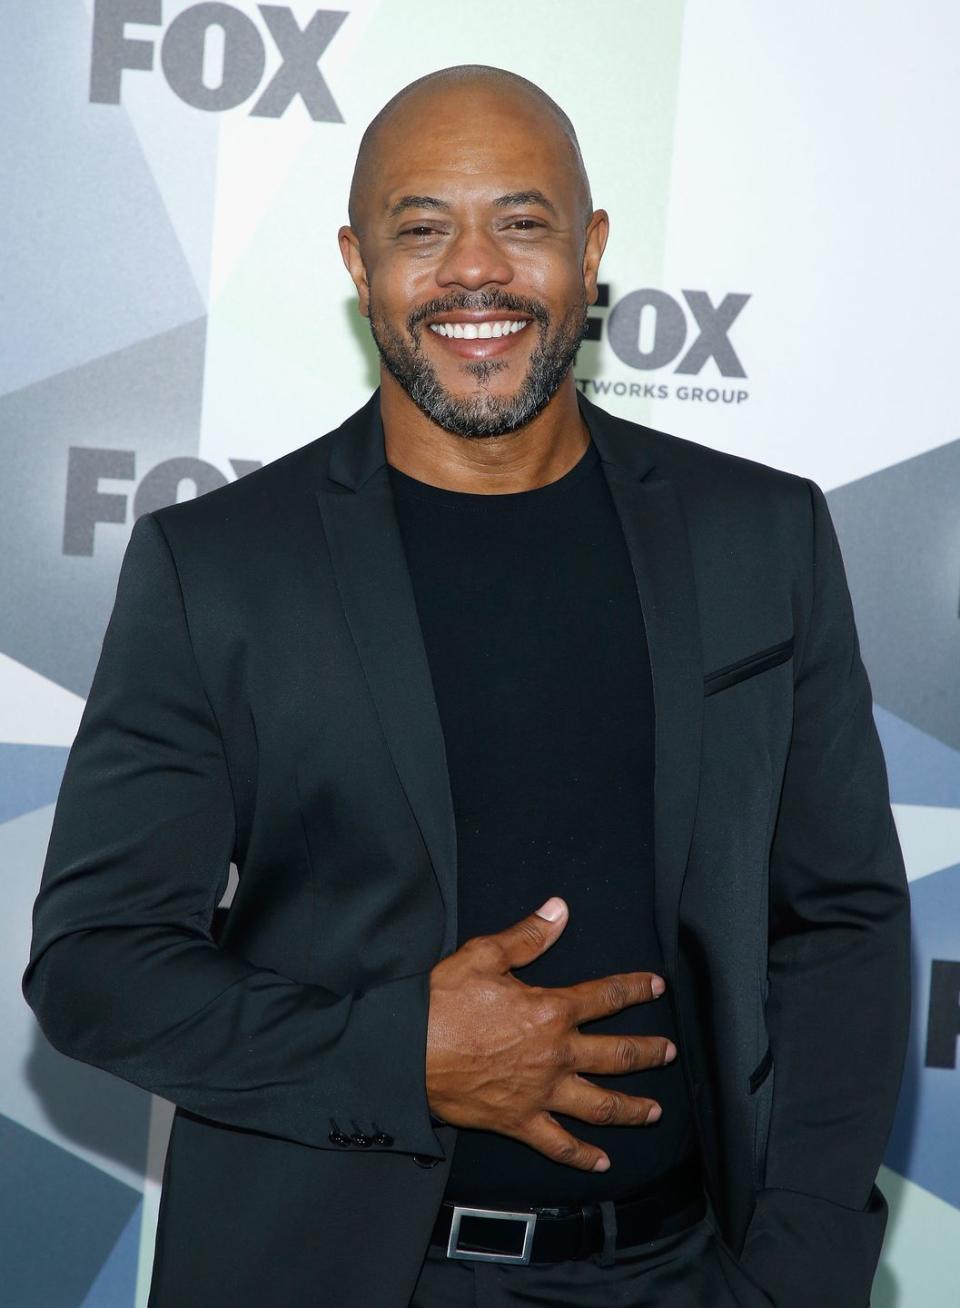 Rockmond Dunbar was named one of TV Guide's 50 Sexiest Stars of All Time.